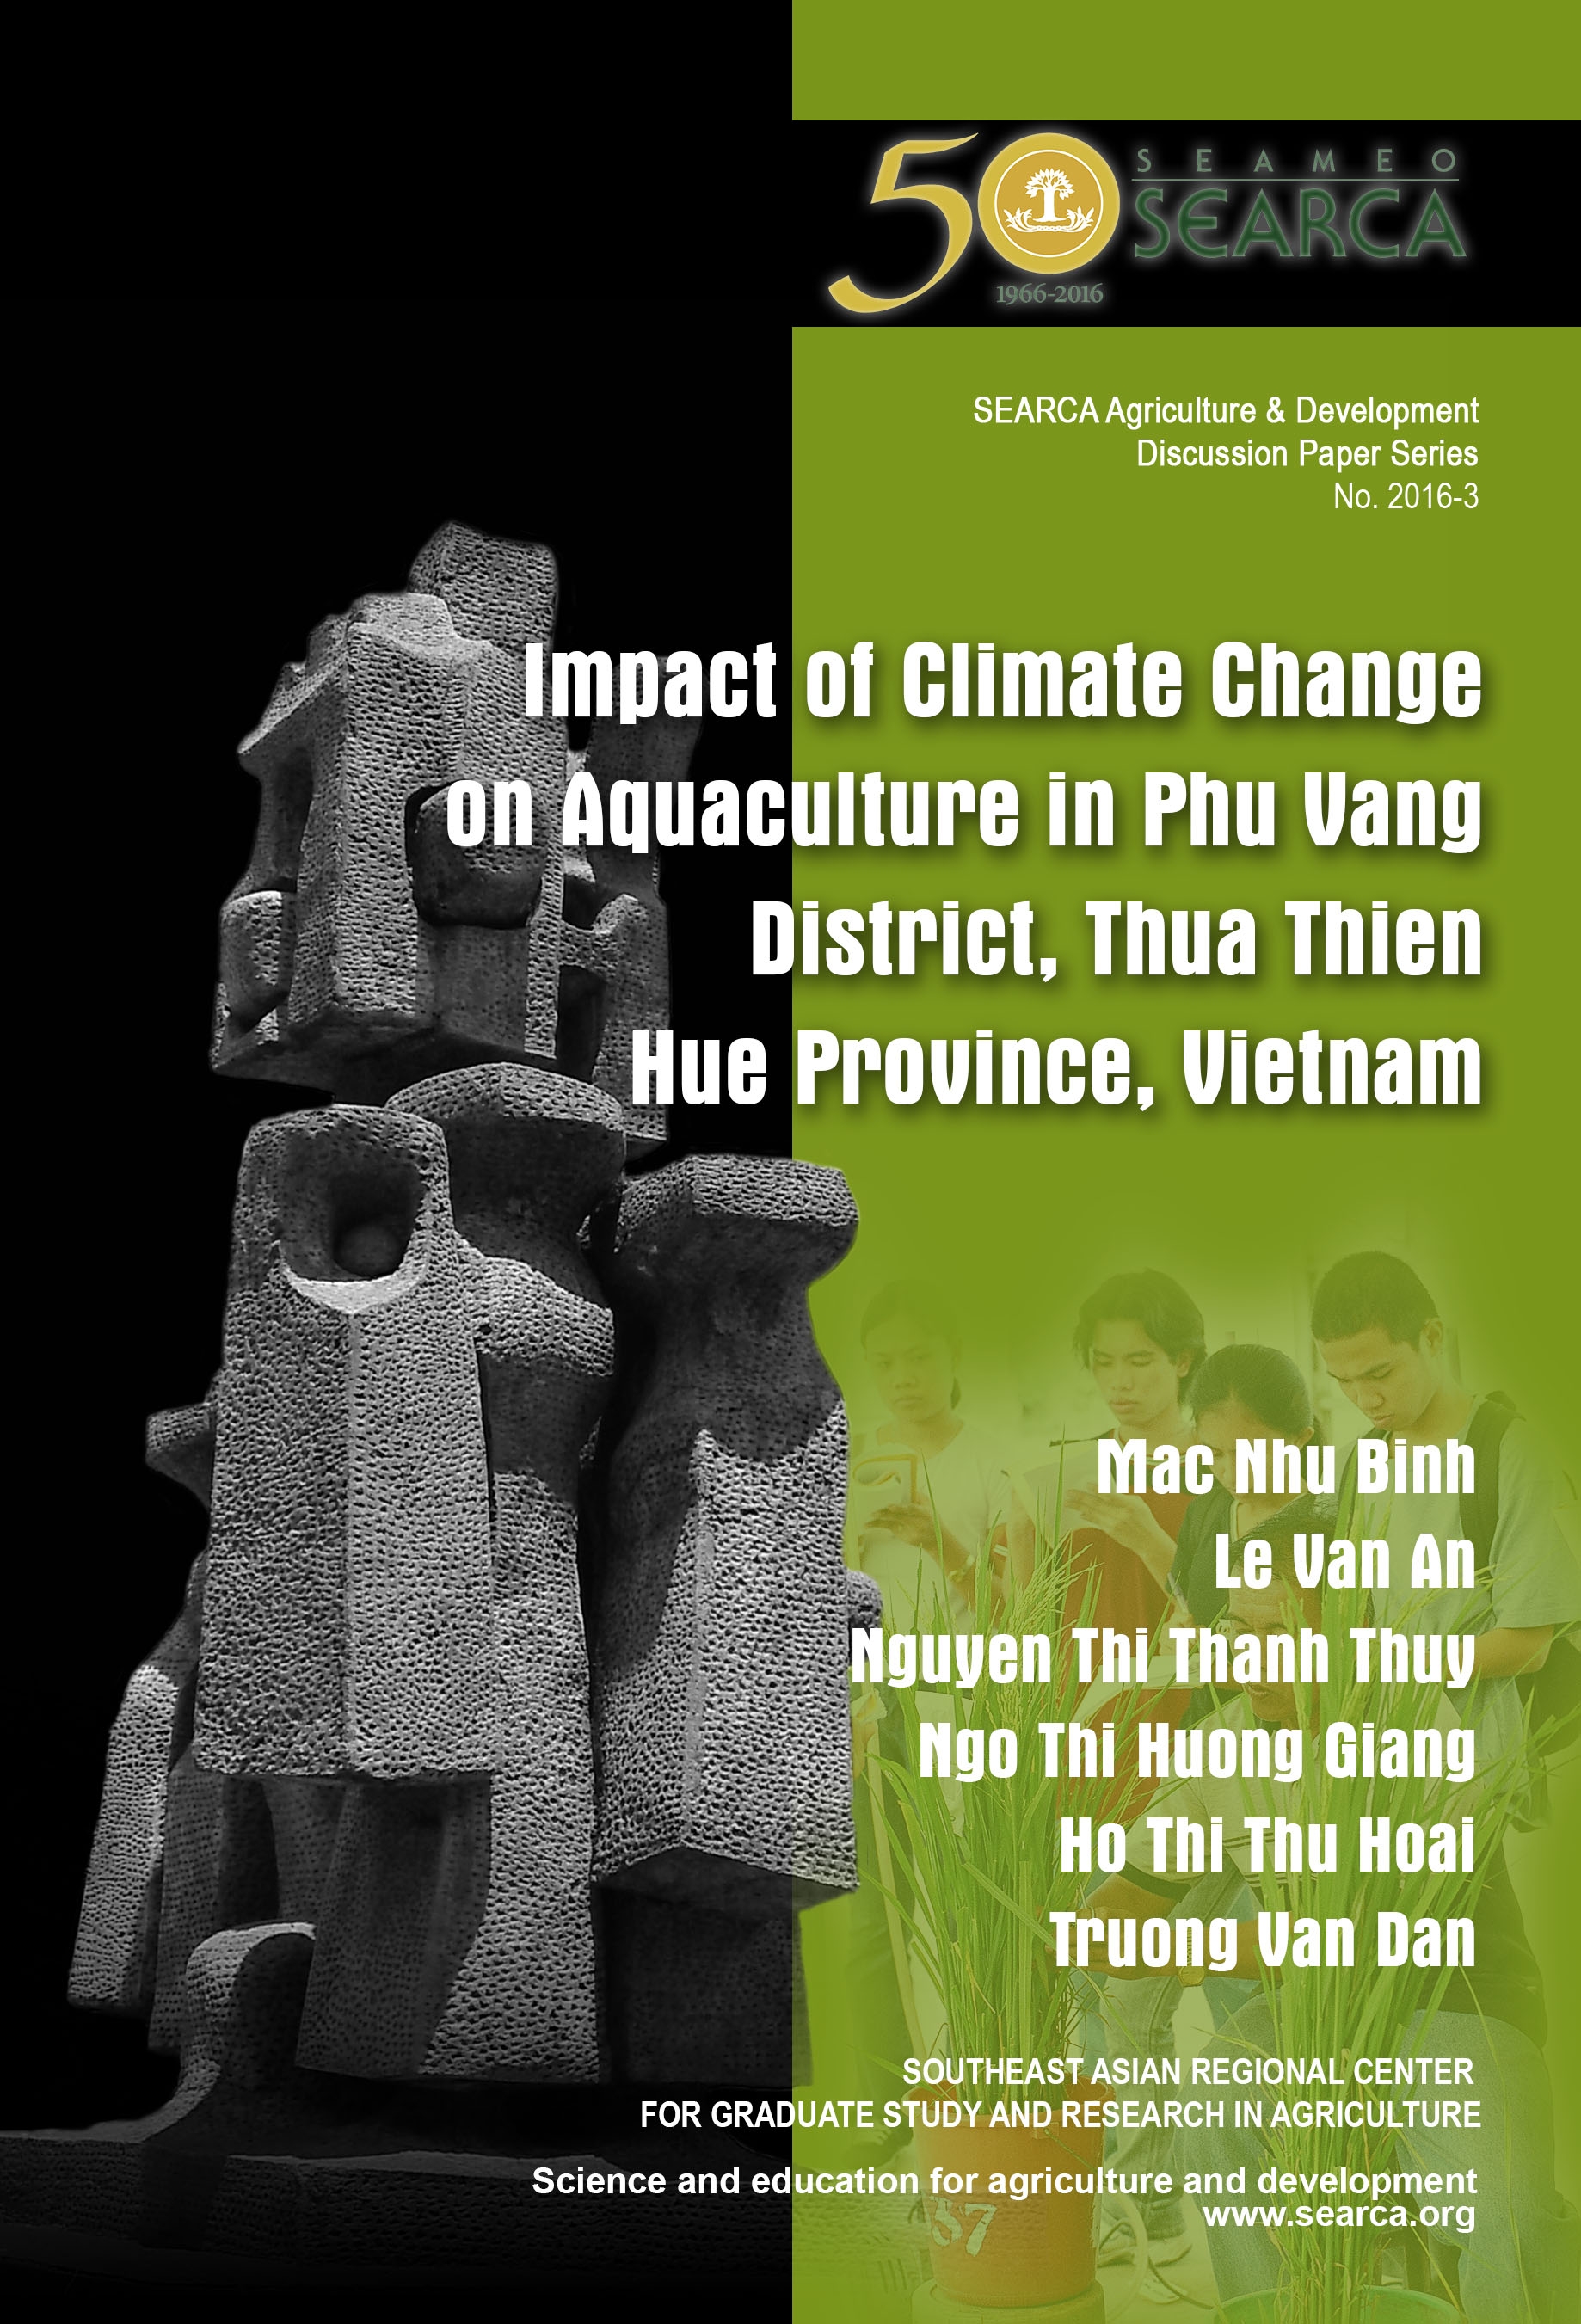 Impact of Climate Change on Aquaculture in Phu Vang District, Thua Thien Hue Province, Vietnam